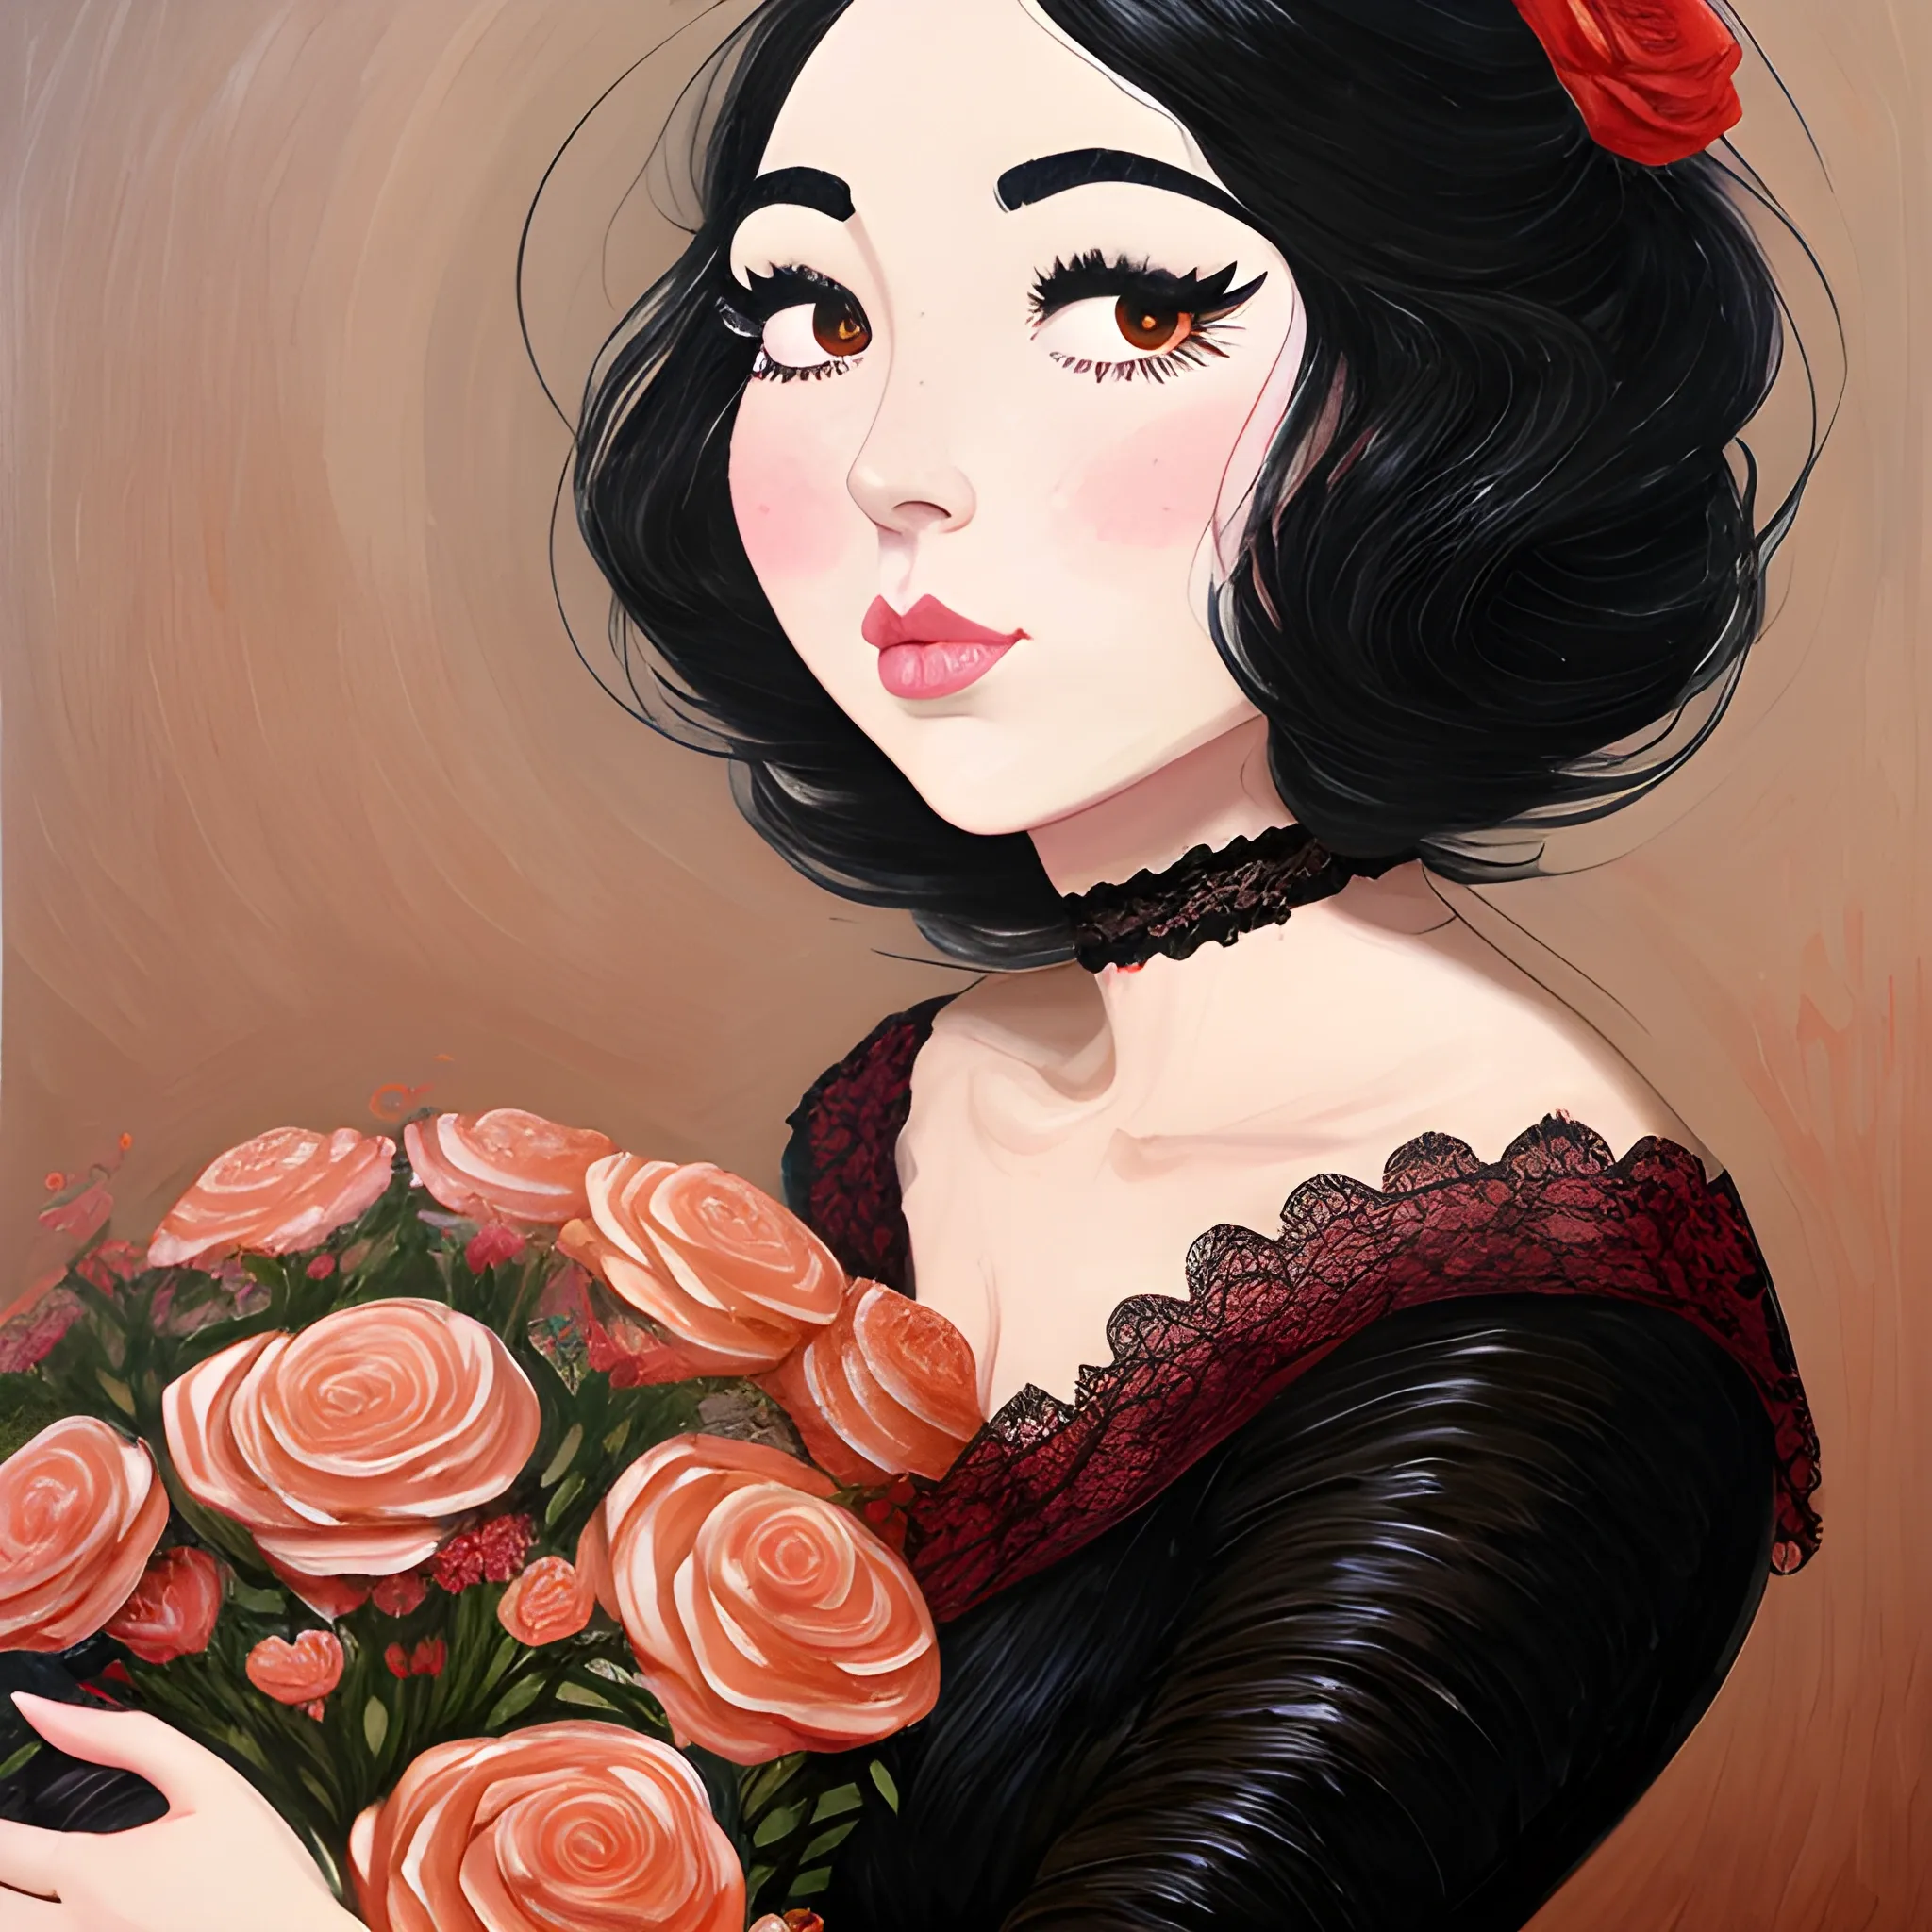 Black-haired woman, curved face, with rosy cheeks, big black eyes, thick eyelashes, thick lips, peach color, thick eyebrows, upturned nose, lying on dark water, holding a bouquet with 5 roses of different colors, wearing a red lace dress, Oil Painting